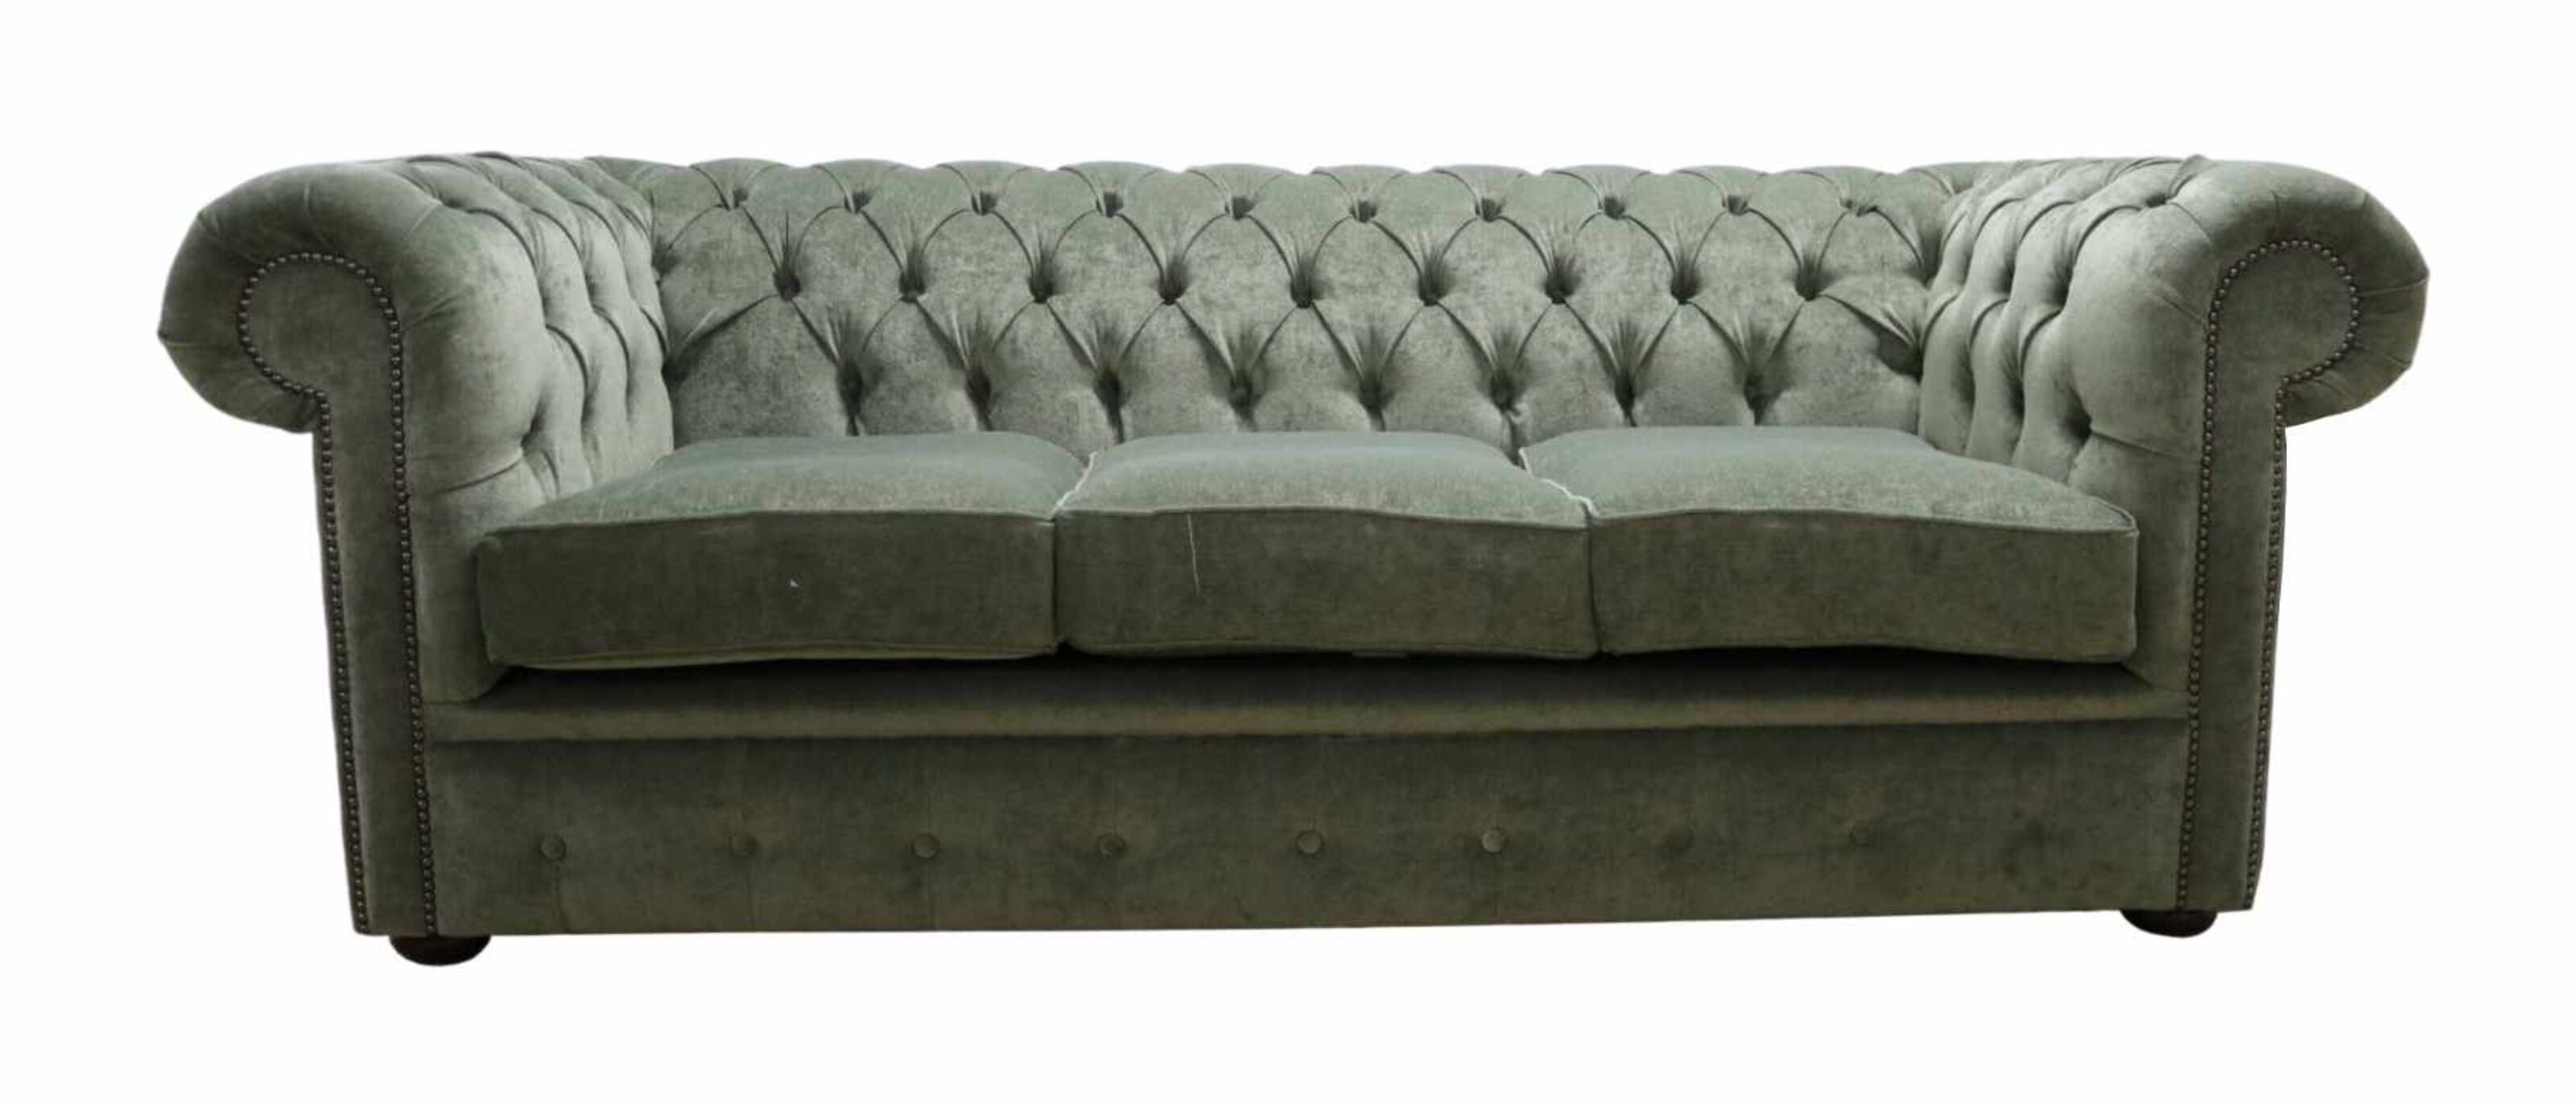 Vintage Vibes Hunting for Chesterfield Sofas on Donedeal  %Post Title